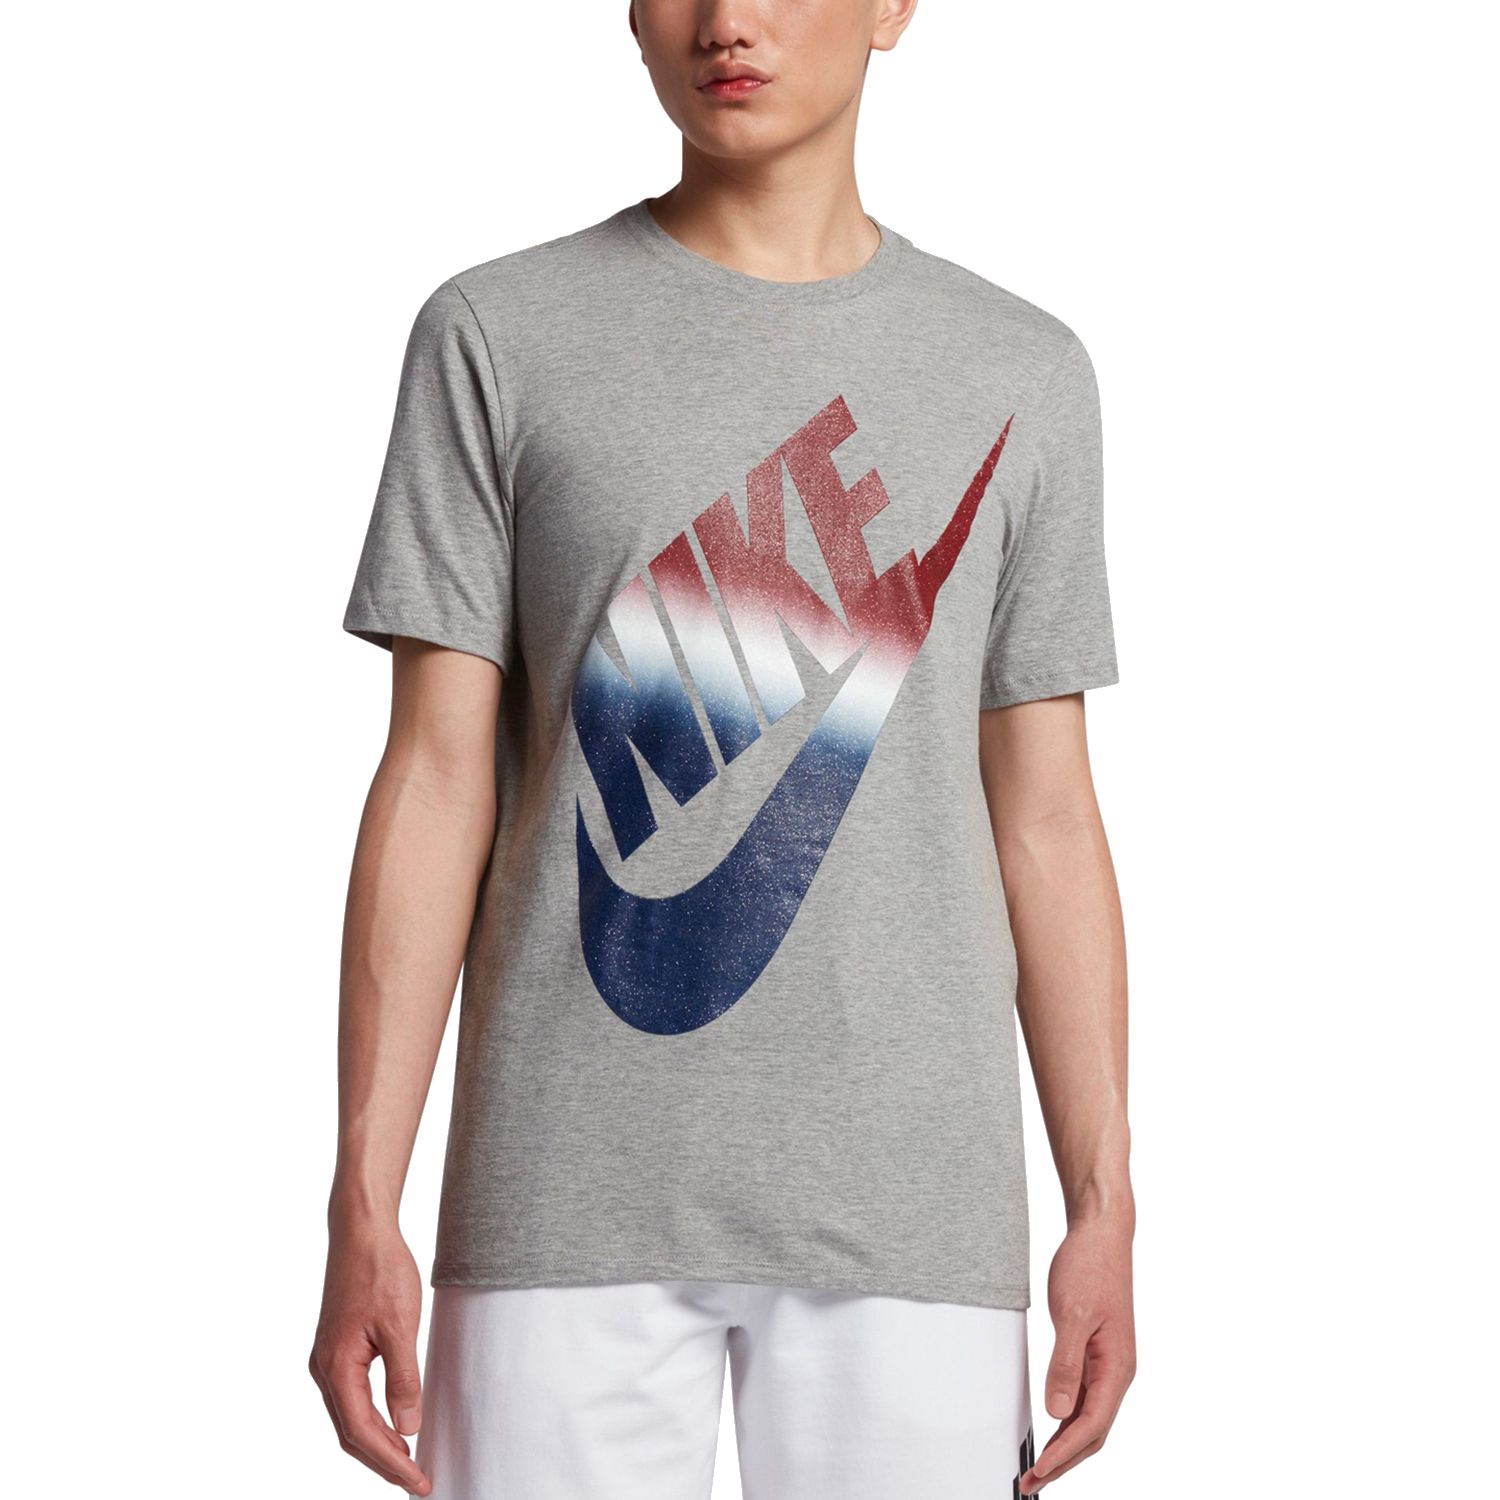 nike red and blue shirt